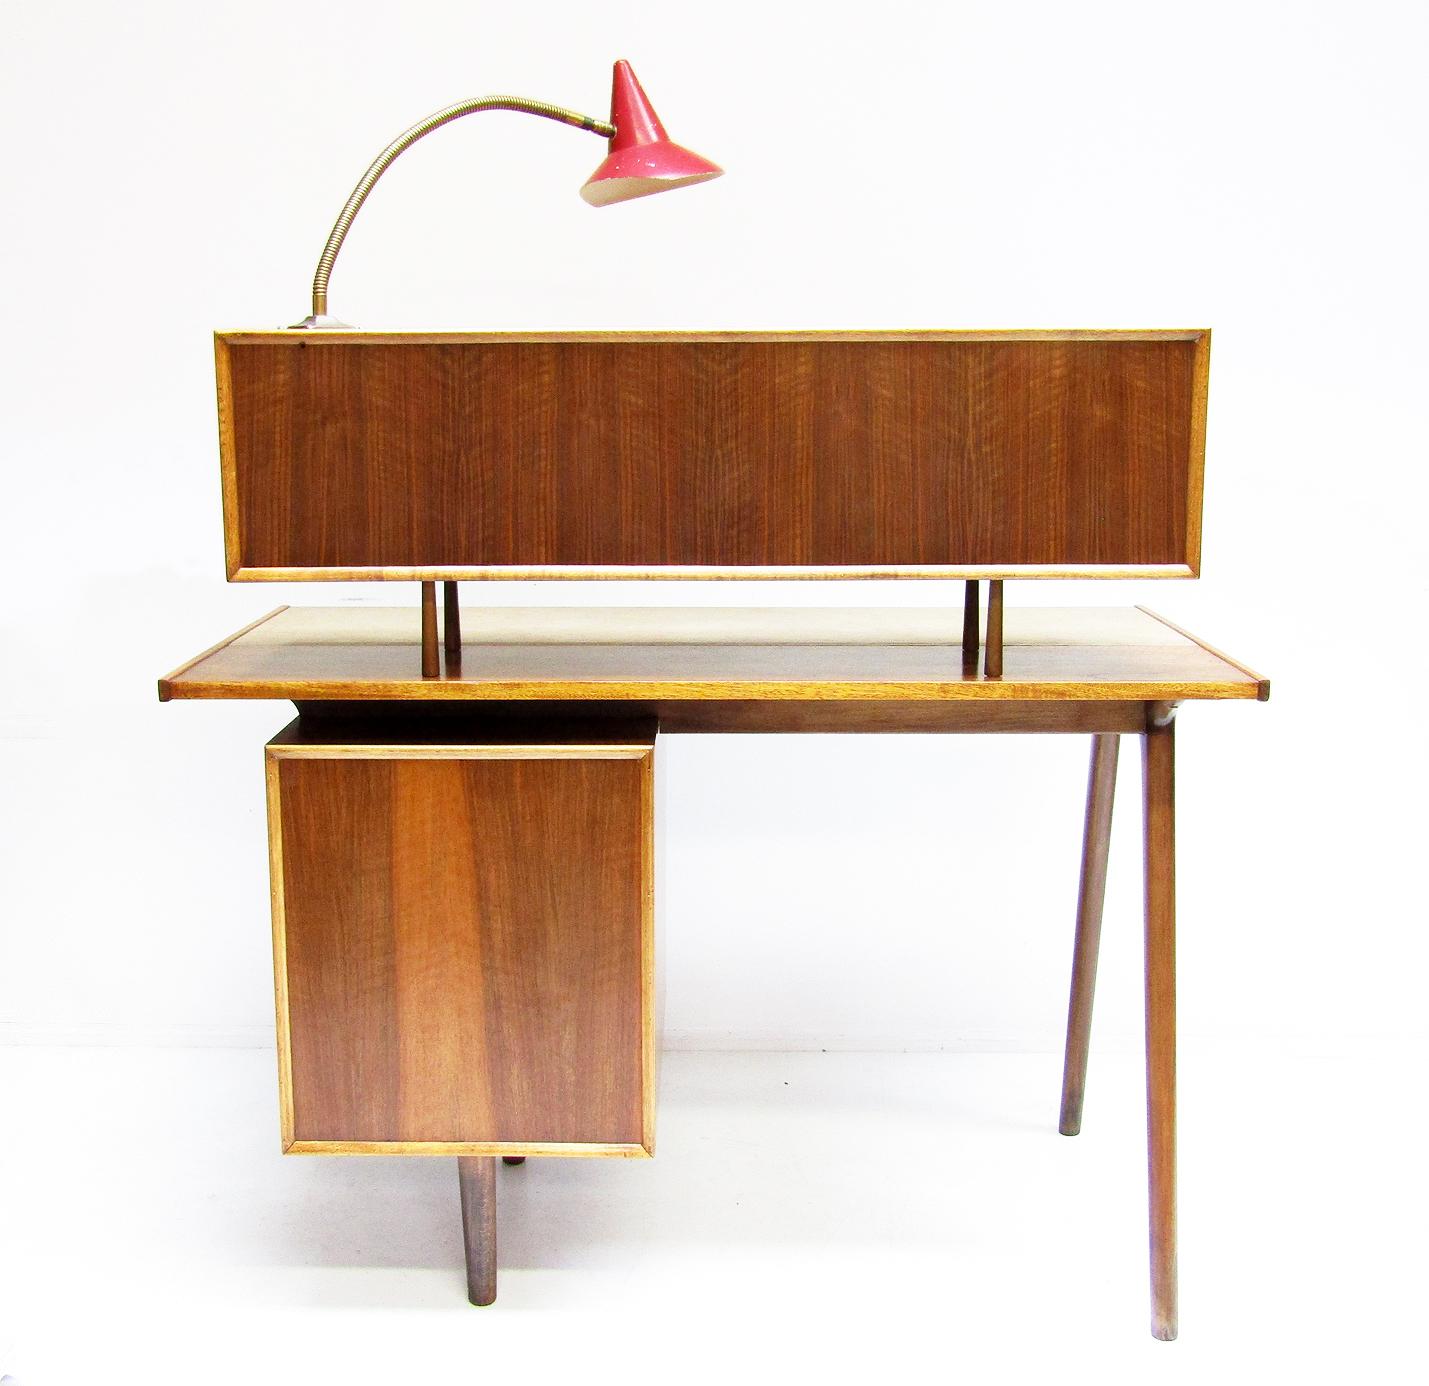 Brass 1950s Vintage Atomic Desk in Walnut with Floating Cabinet & Lamp